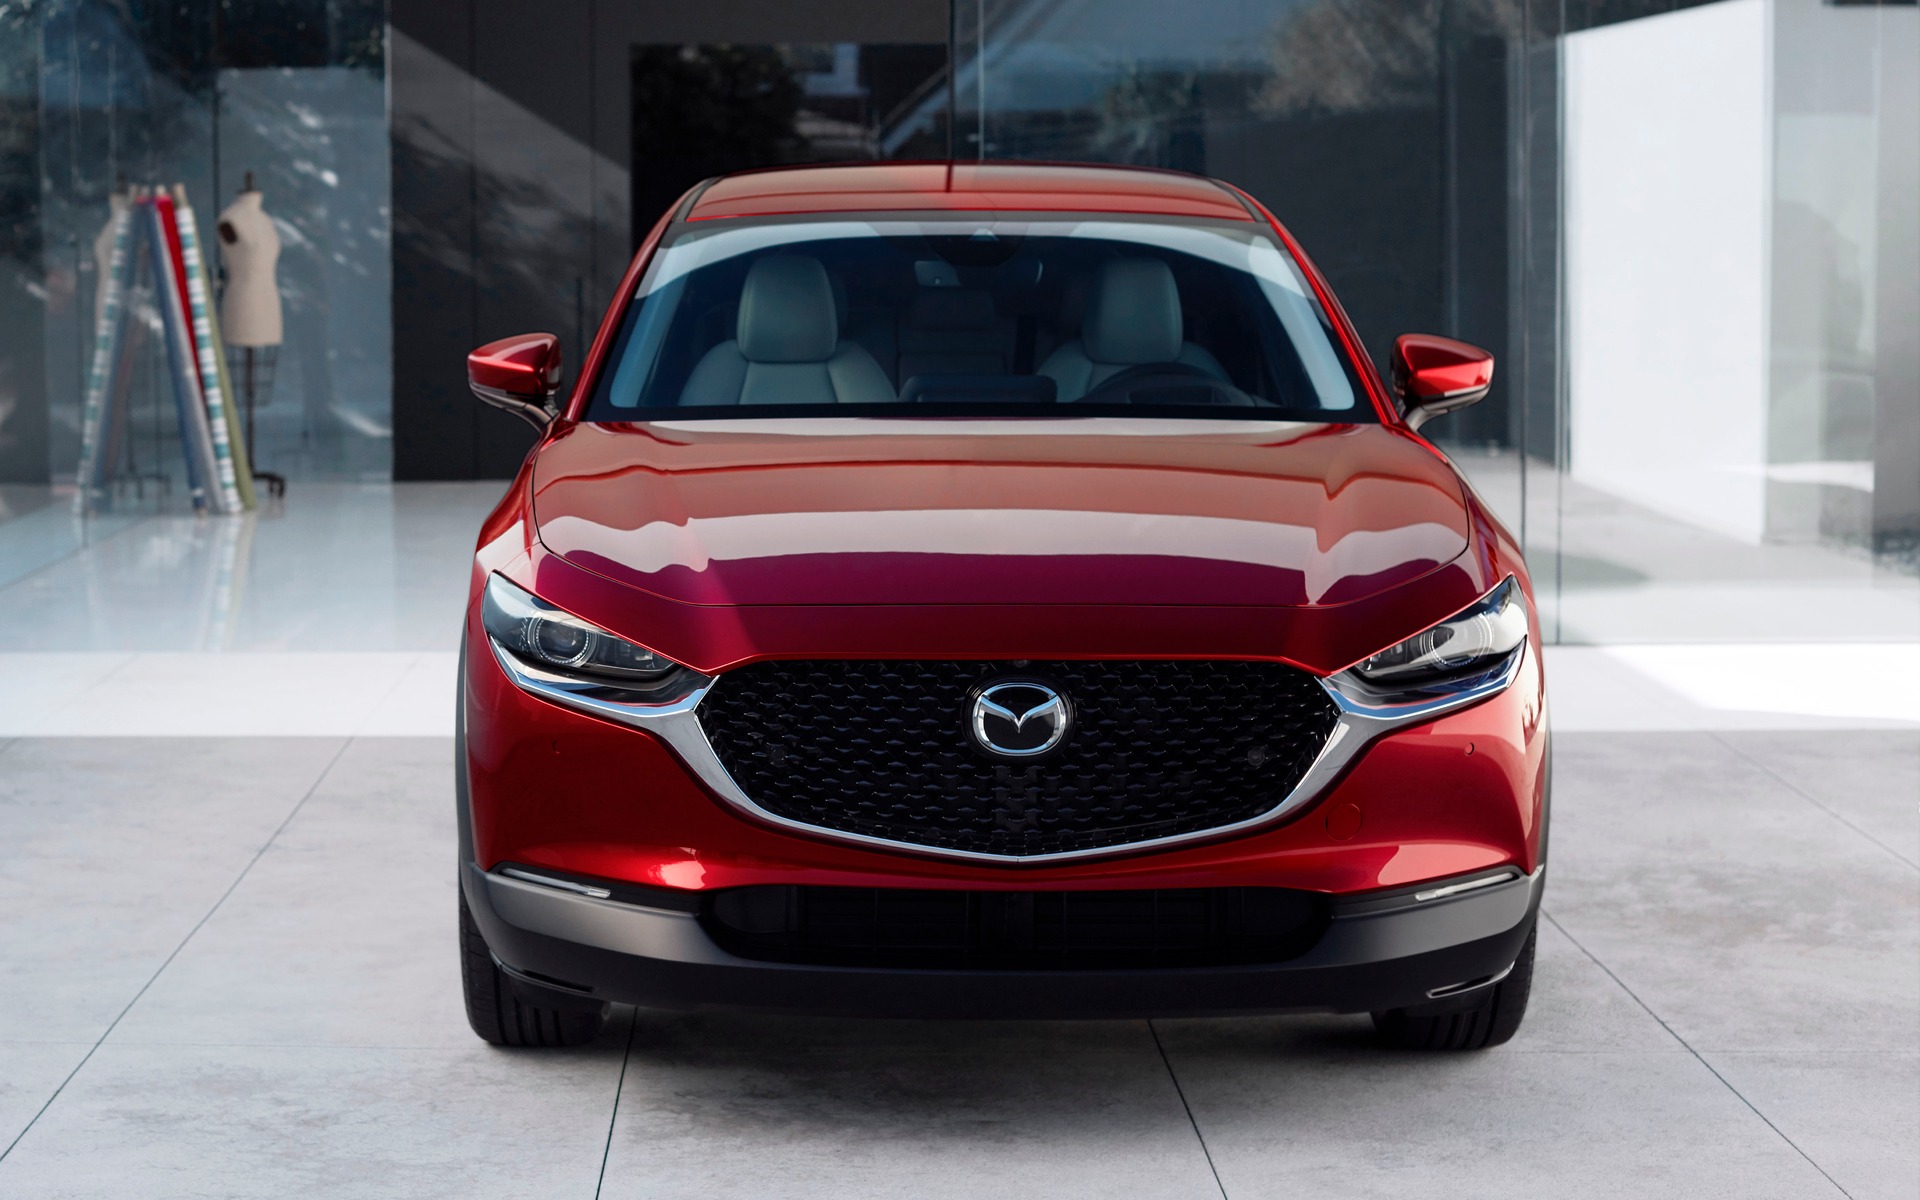 Mazda is Planning All-Electric and Plug-in Hybrid Cars - The Car Guide